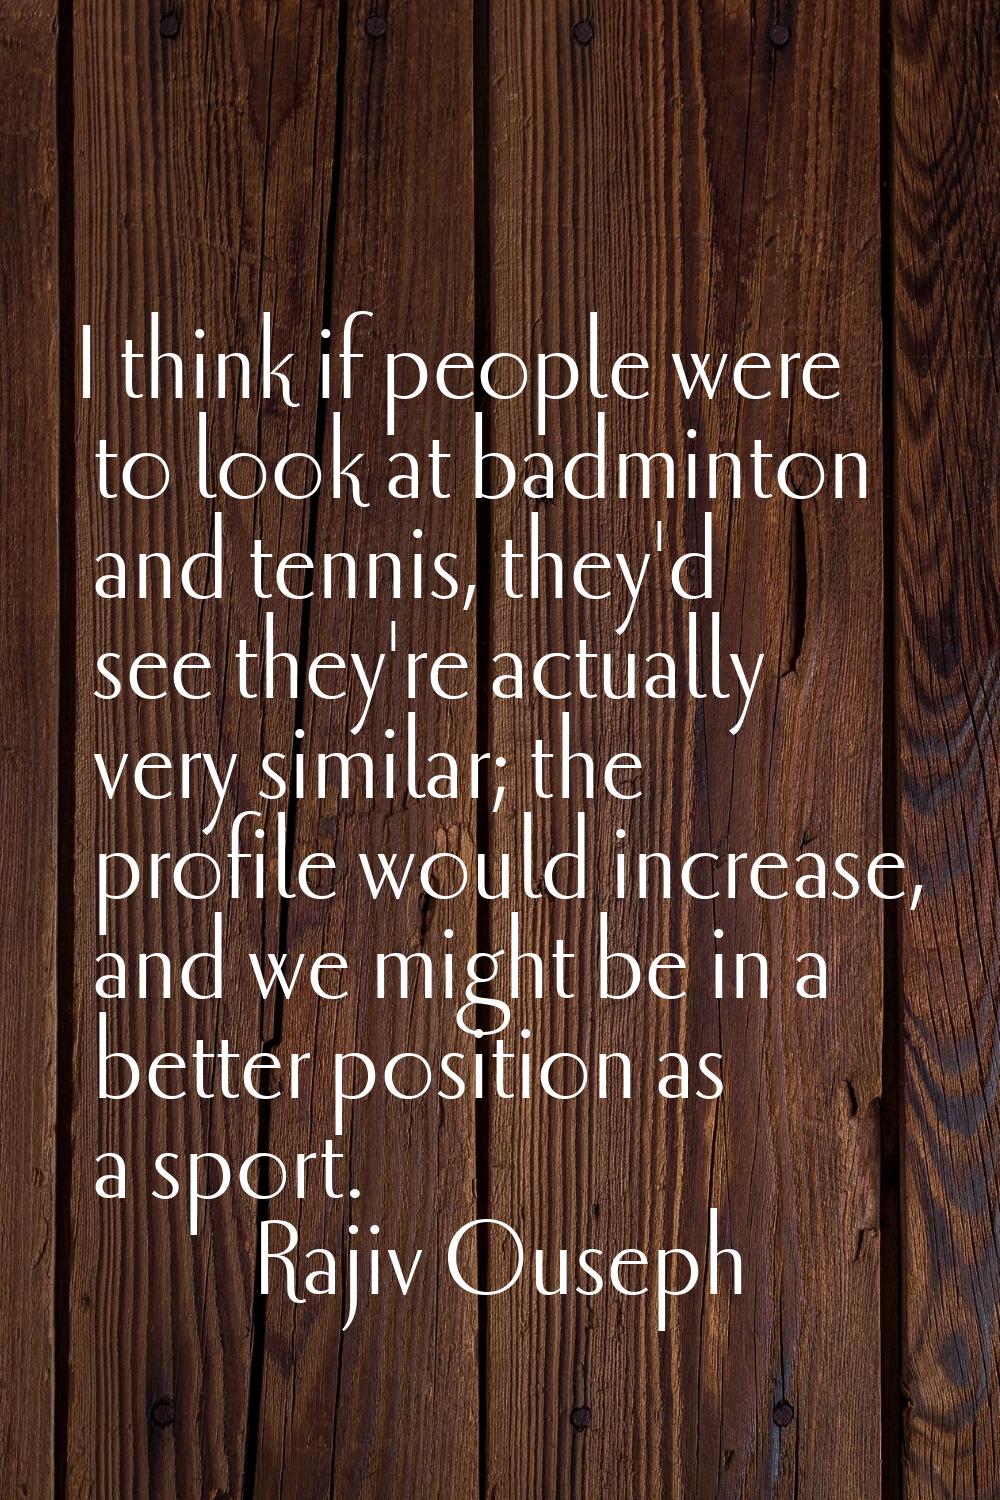 I think if people were to look at badminton and tennis, they'd see they're actually very similar; t